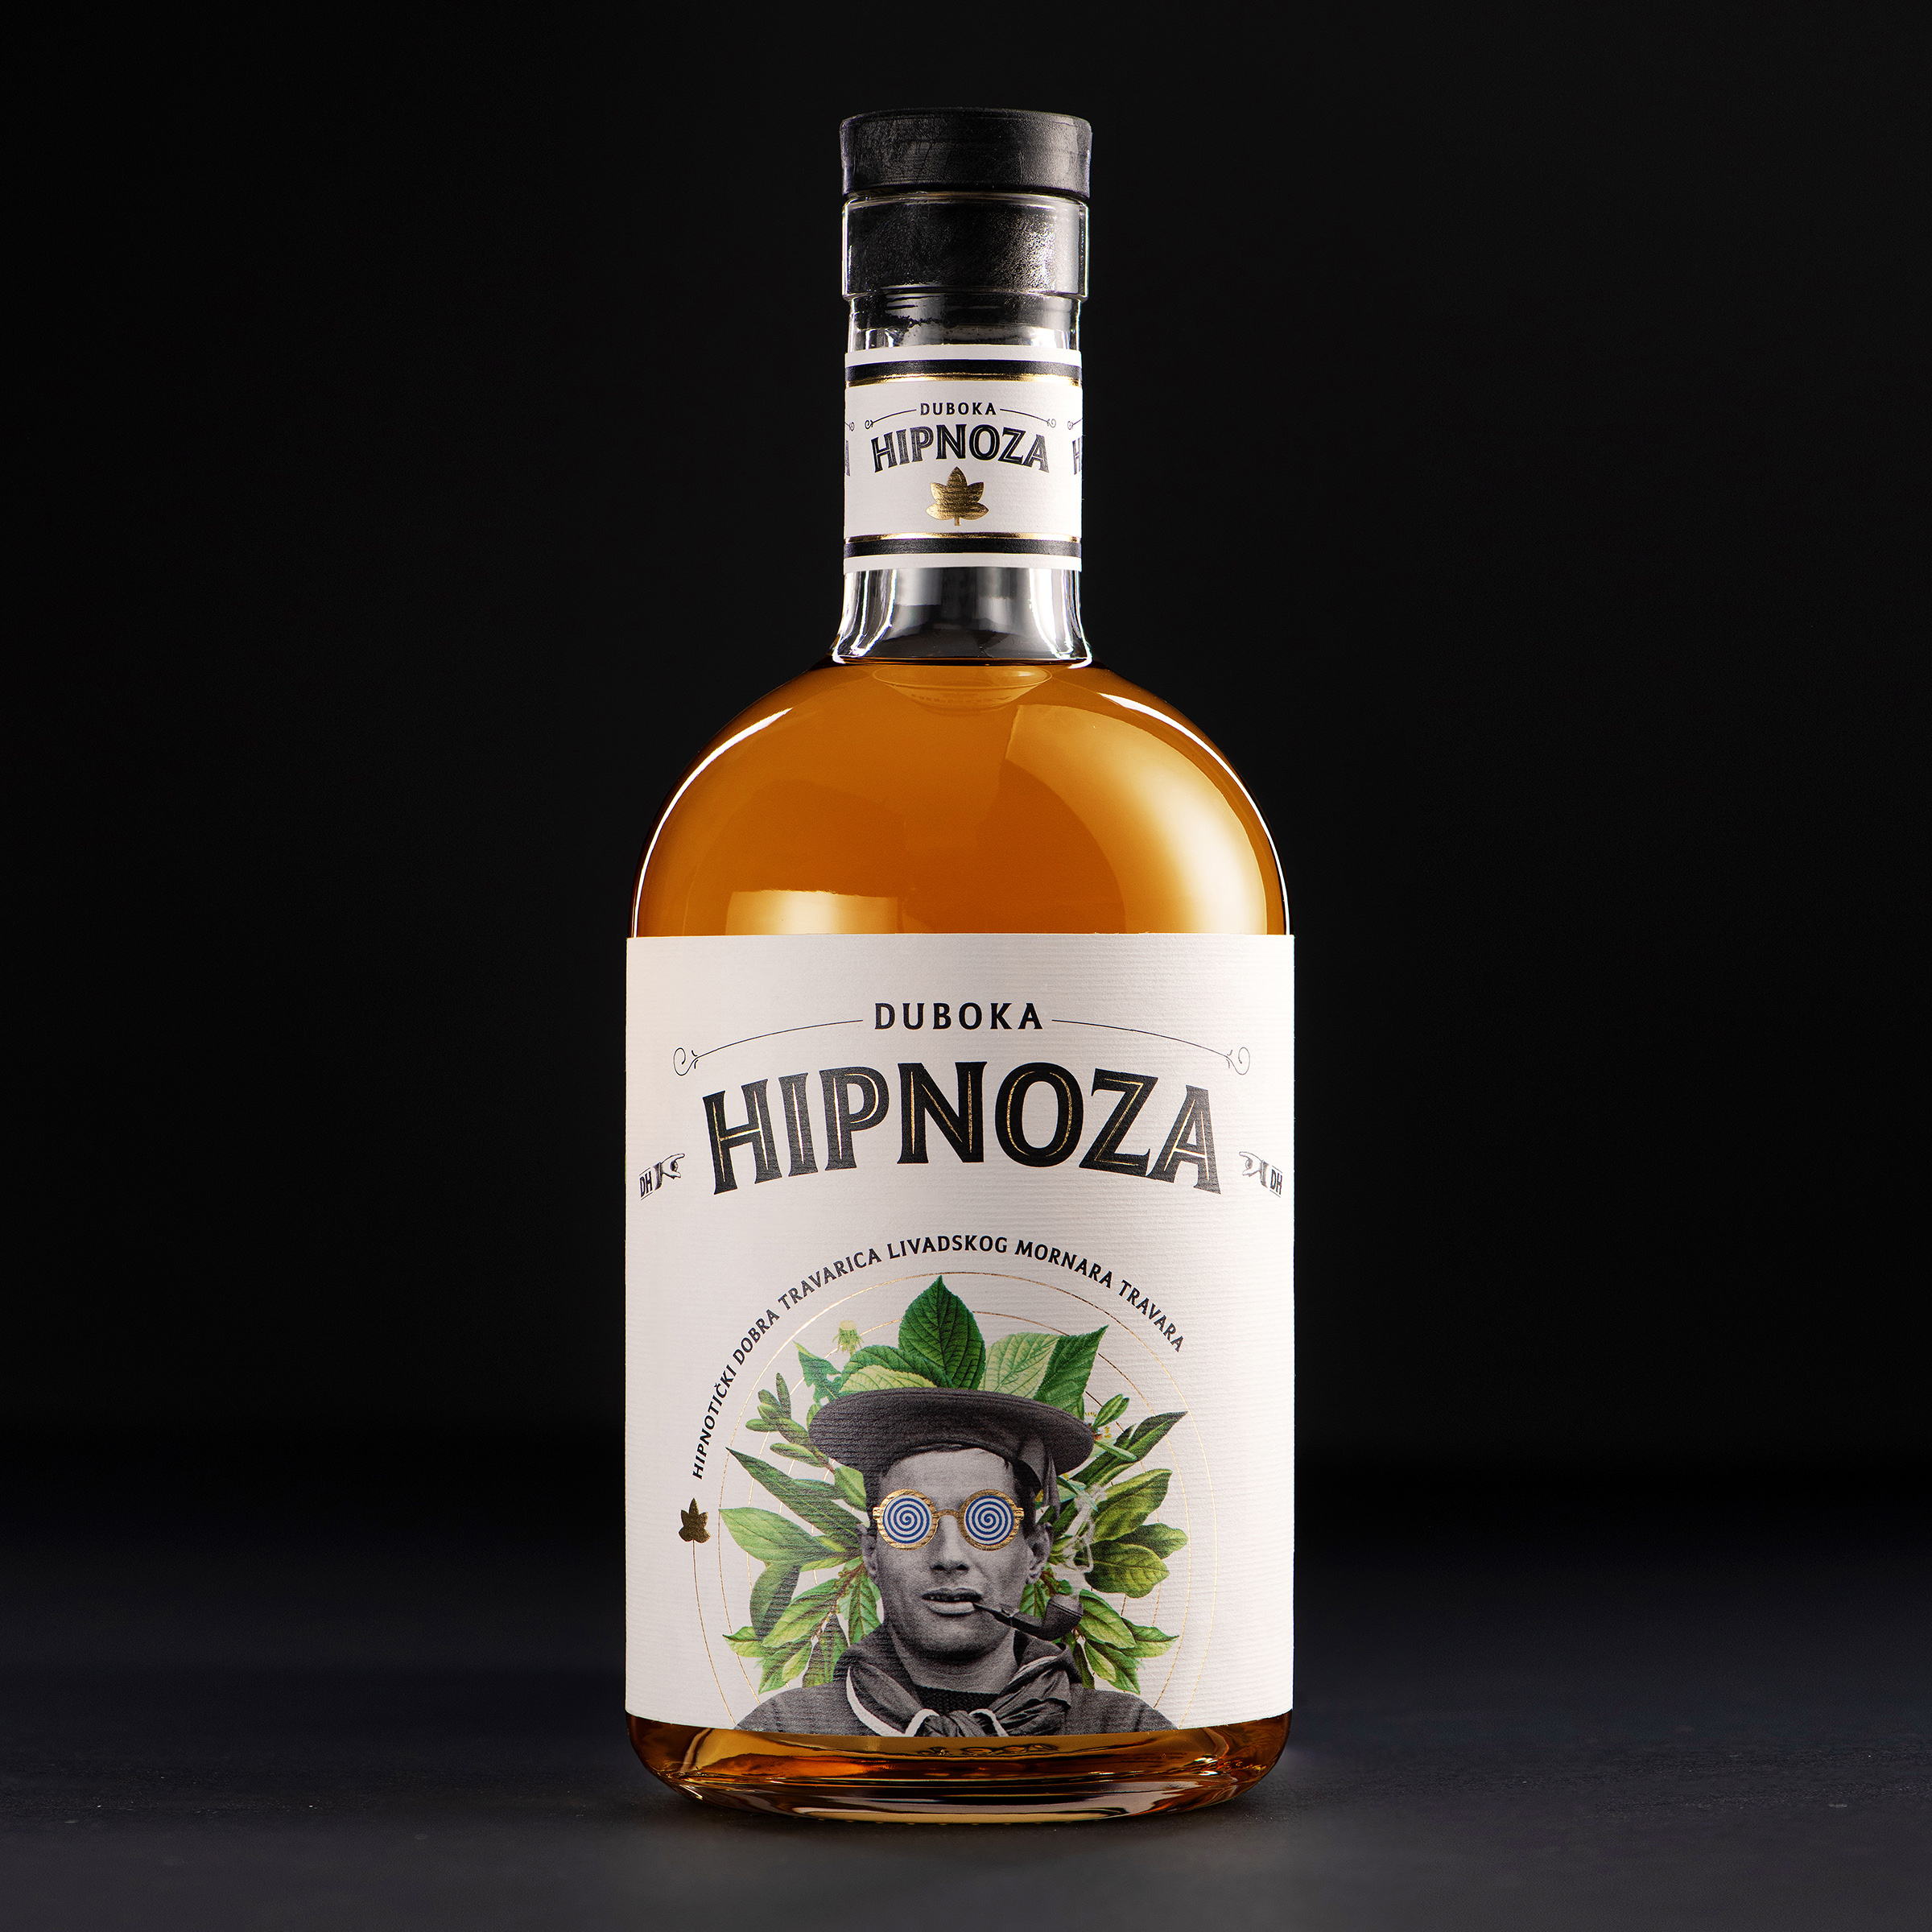 Introducing Hipnoza Brandy: A Unique Blend of With Local Aromatic Herbs